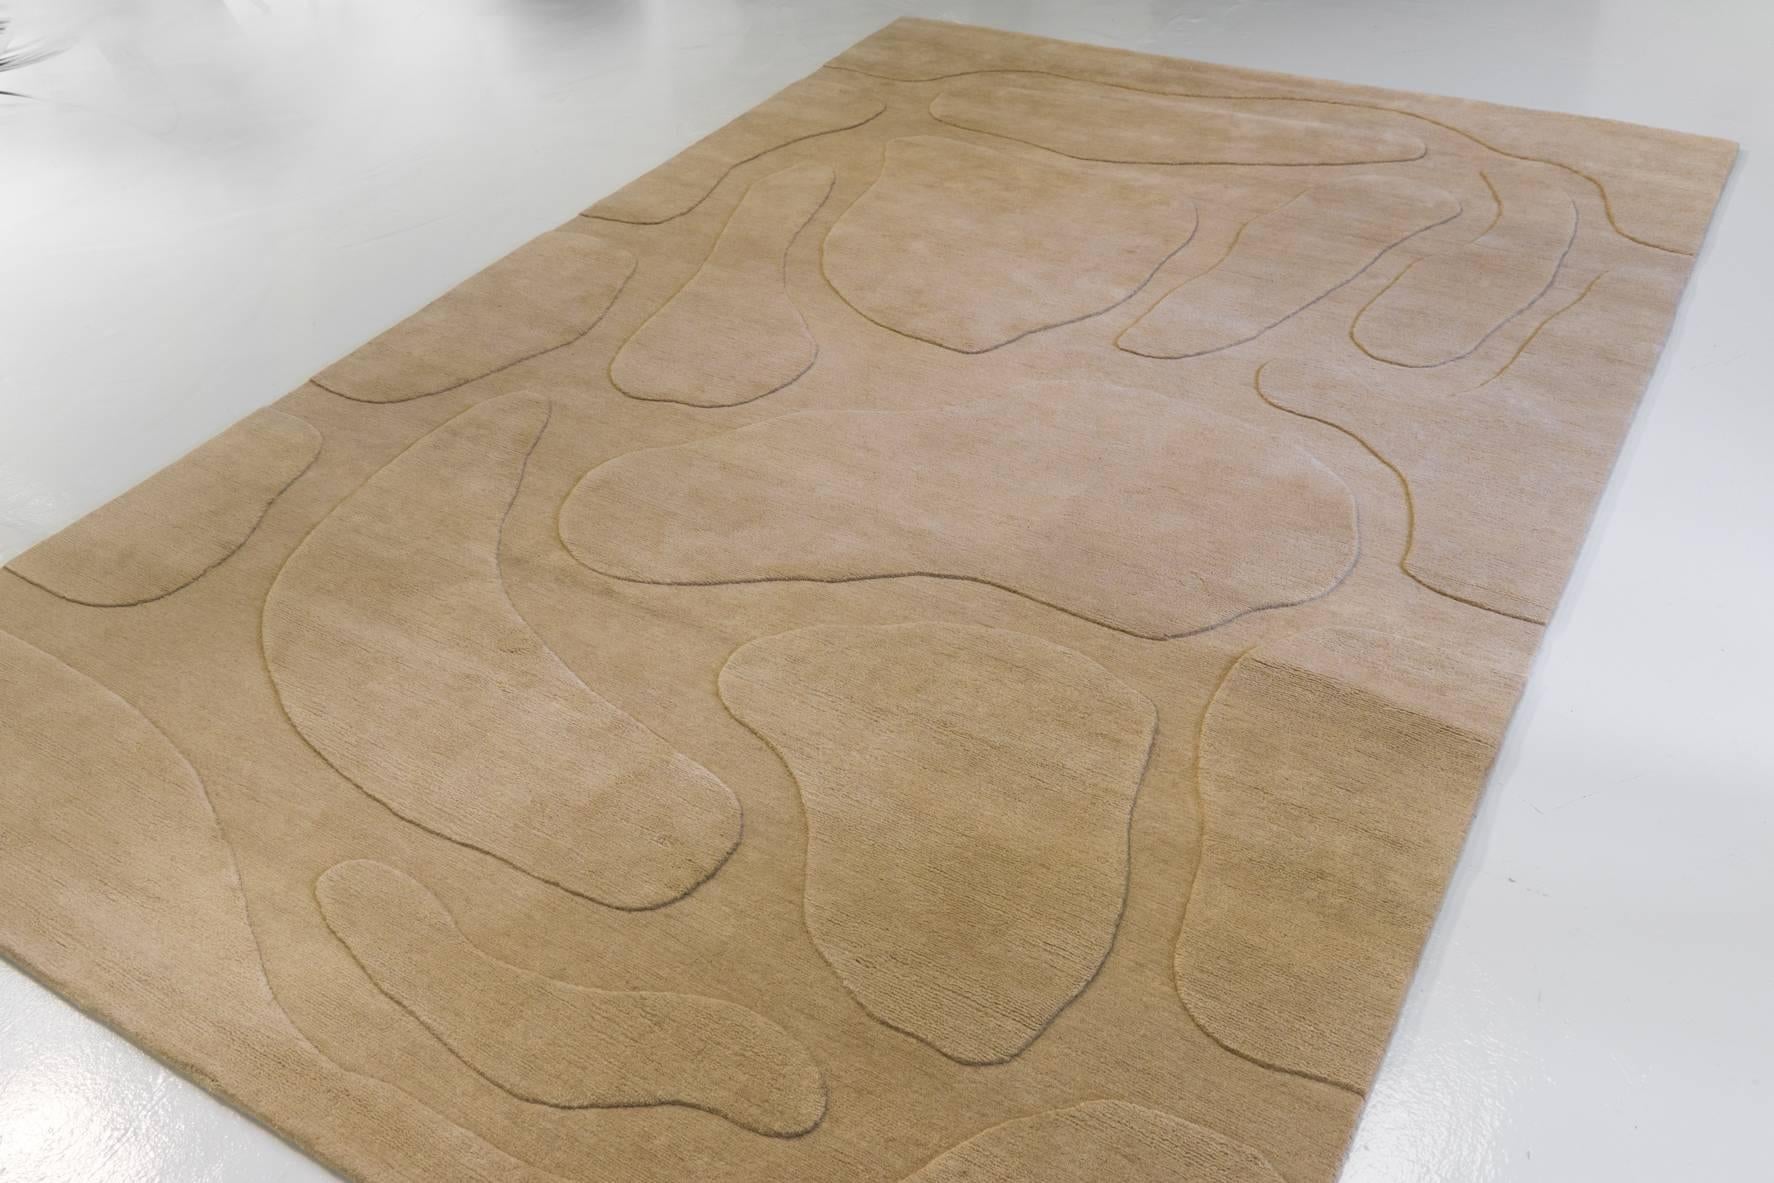 Luxurious area rug designed by Parisian artist Jacques Jarrige and produced by Diurne. For his first rug design Jarrige chose a variation of his sculpted screens exploring the interplay of solids and voids on this voluptuous medium. The texture is